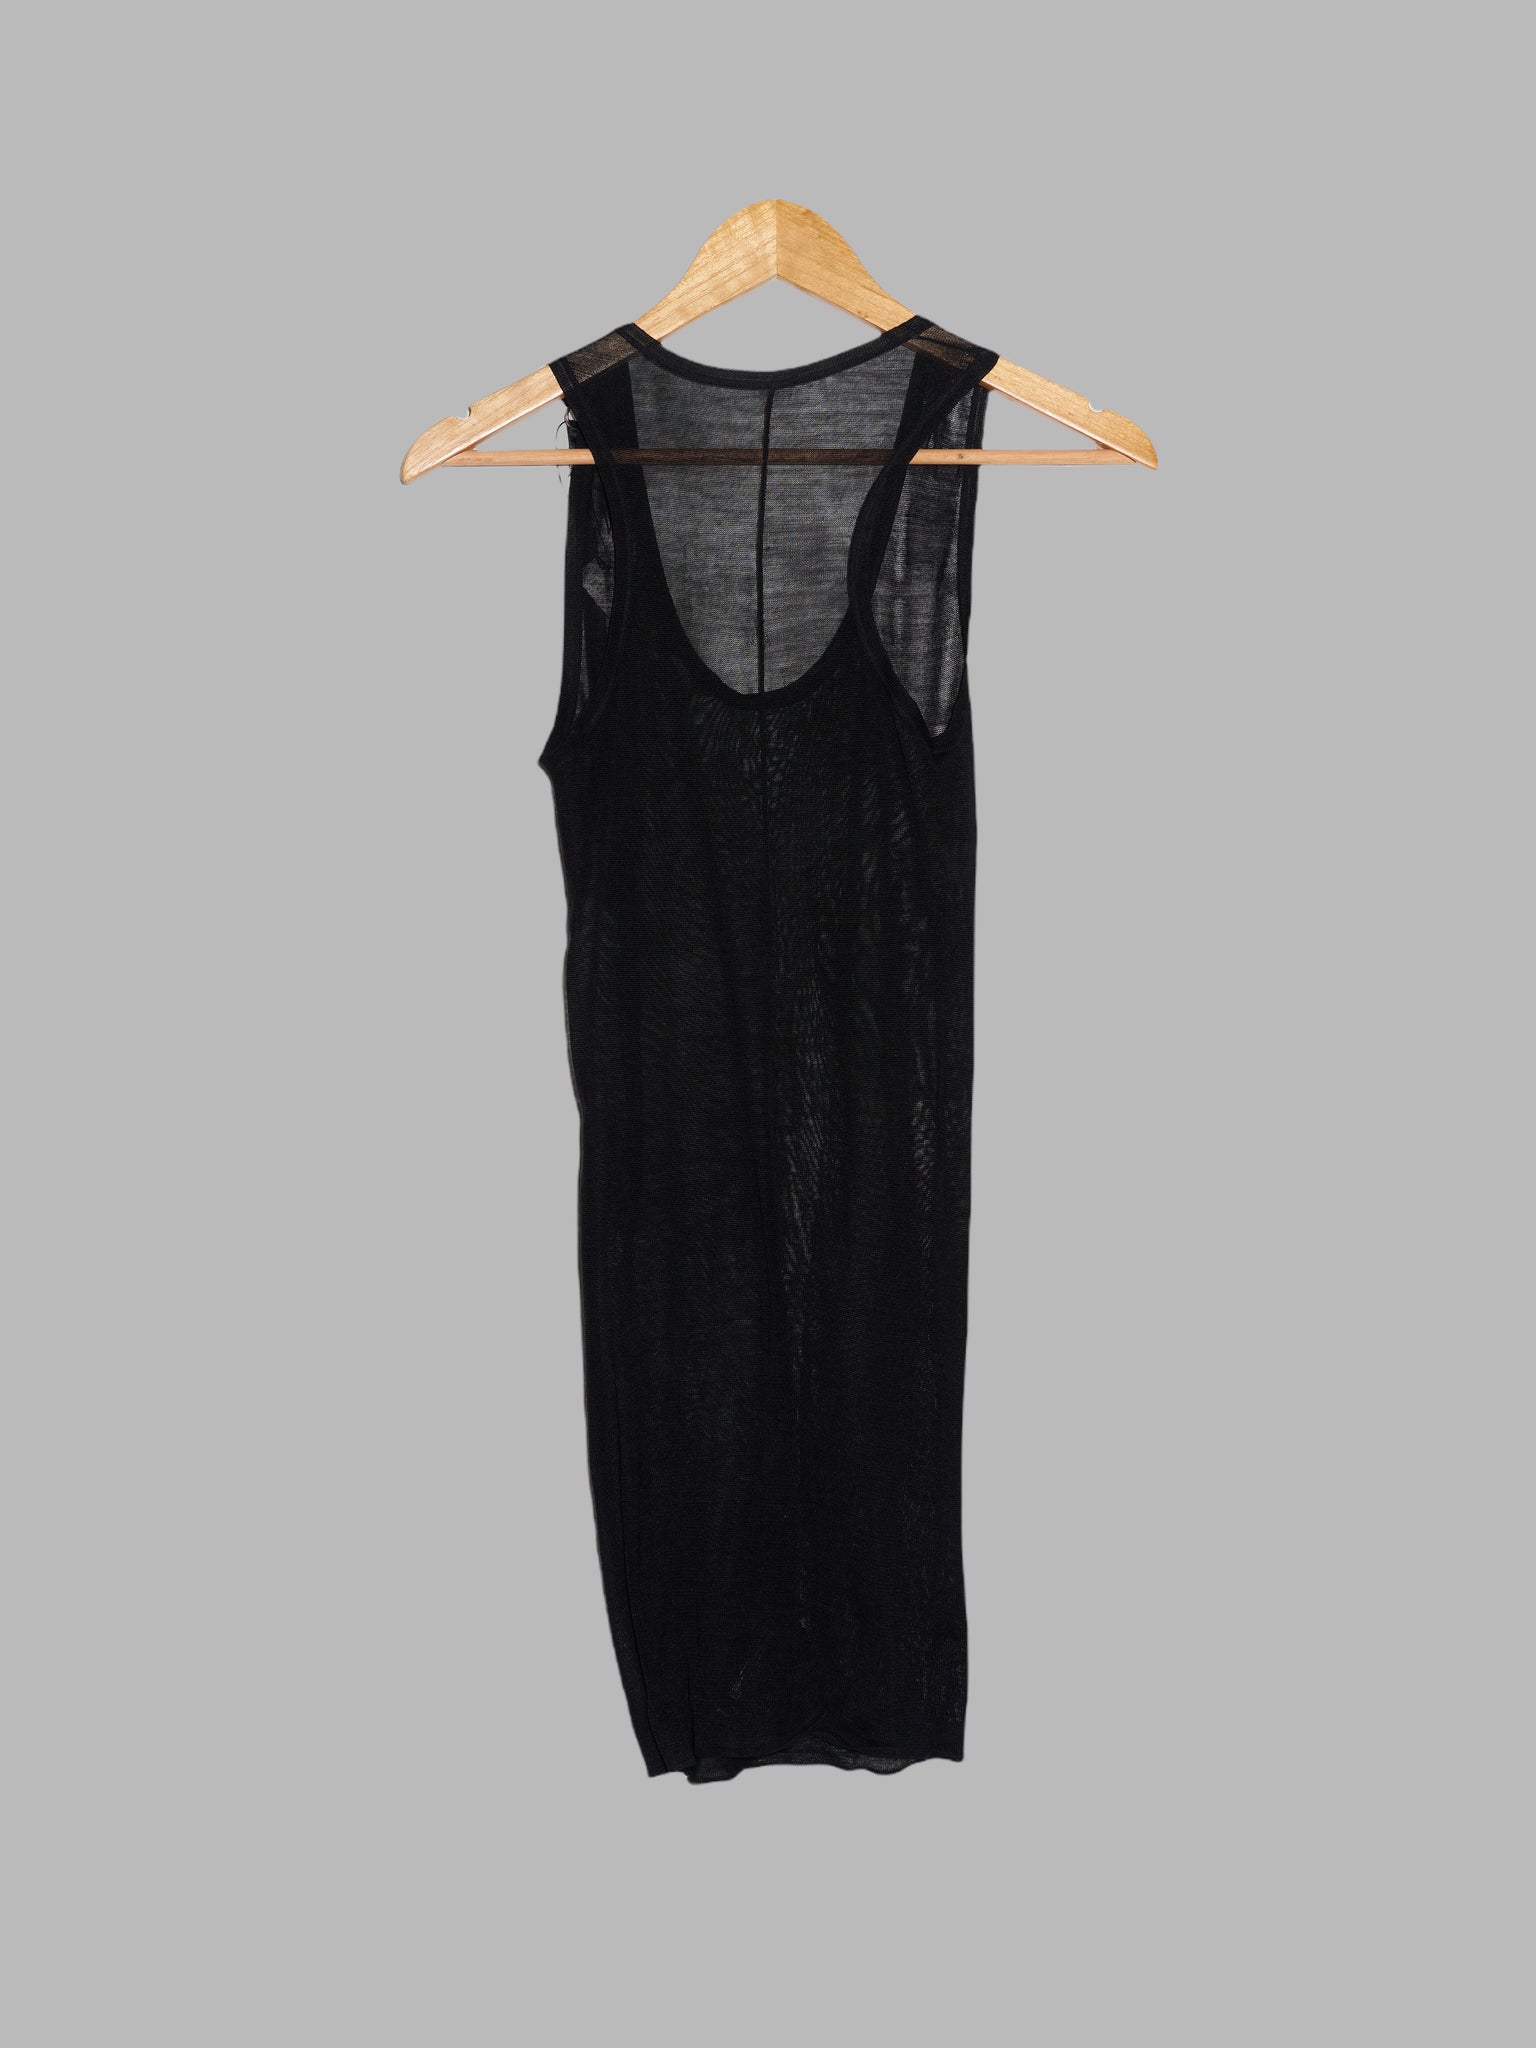 Jean Colonna sheer black singlet new with tags - S